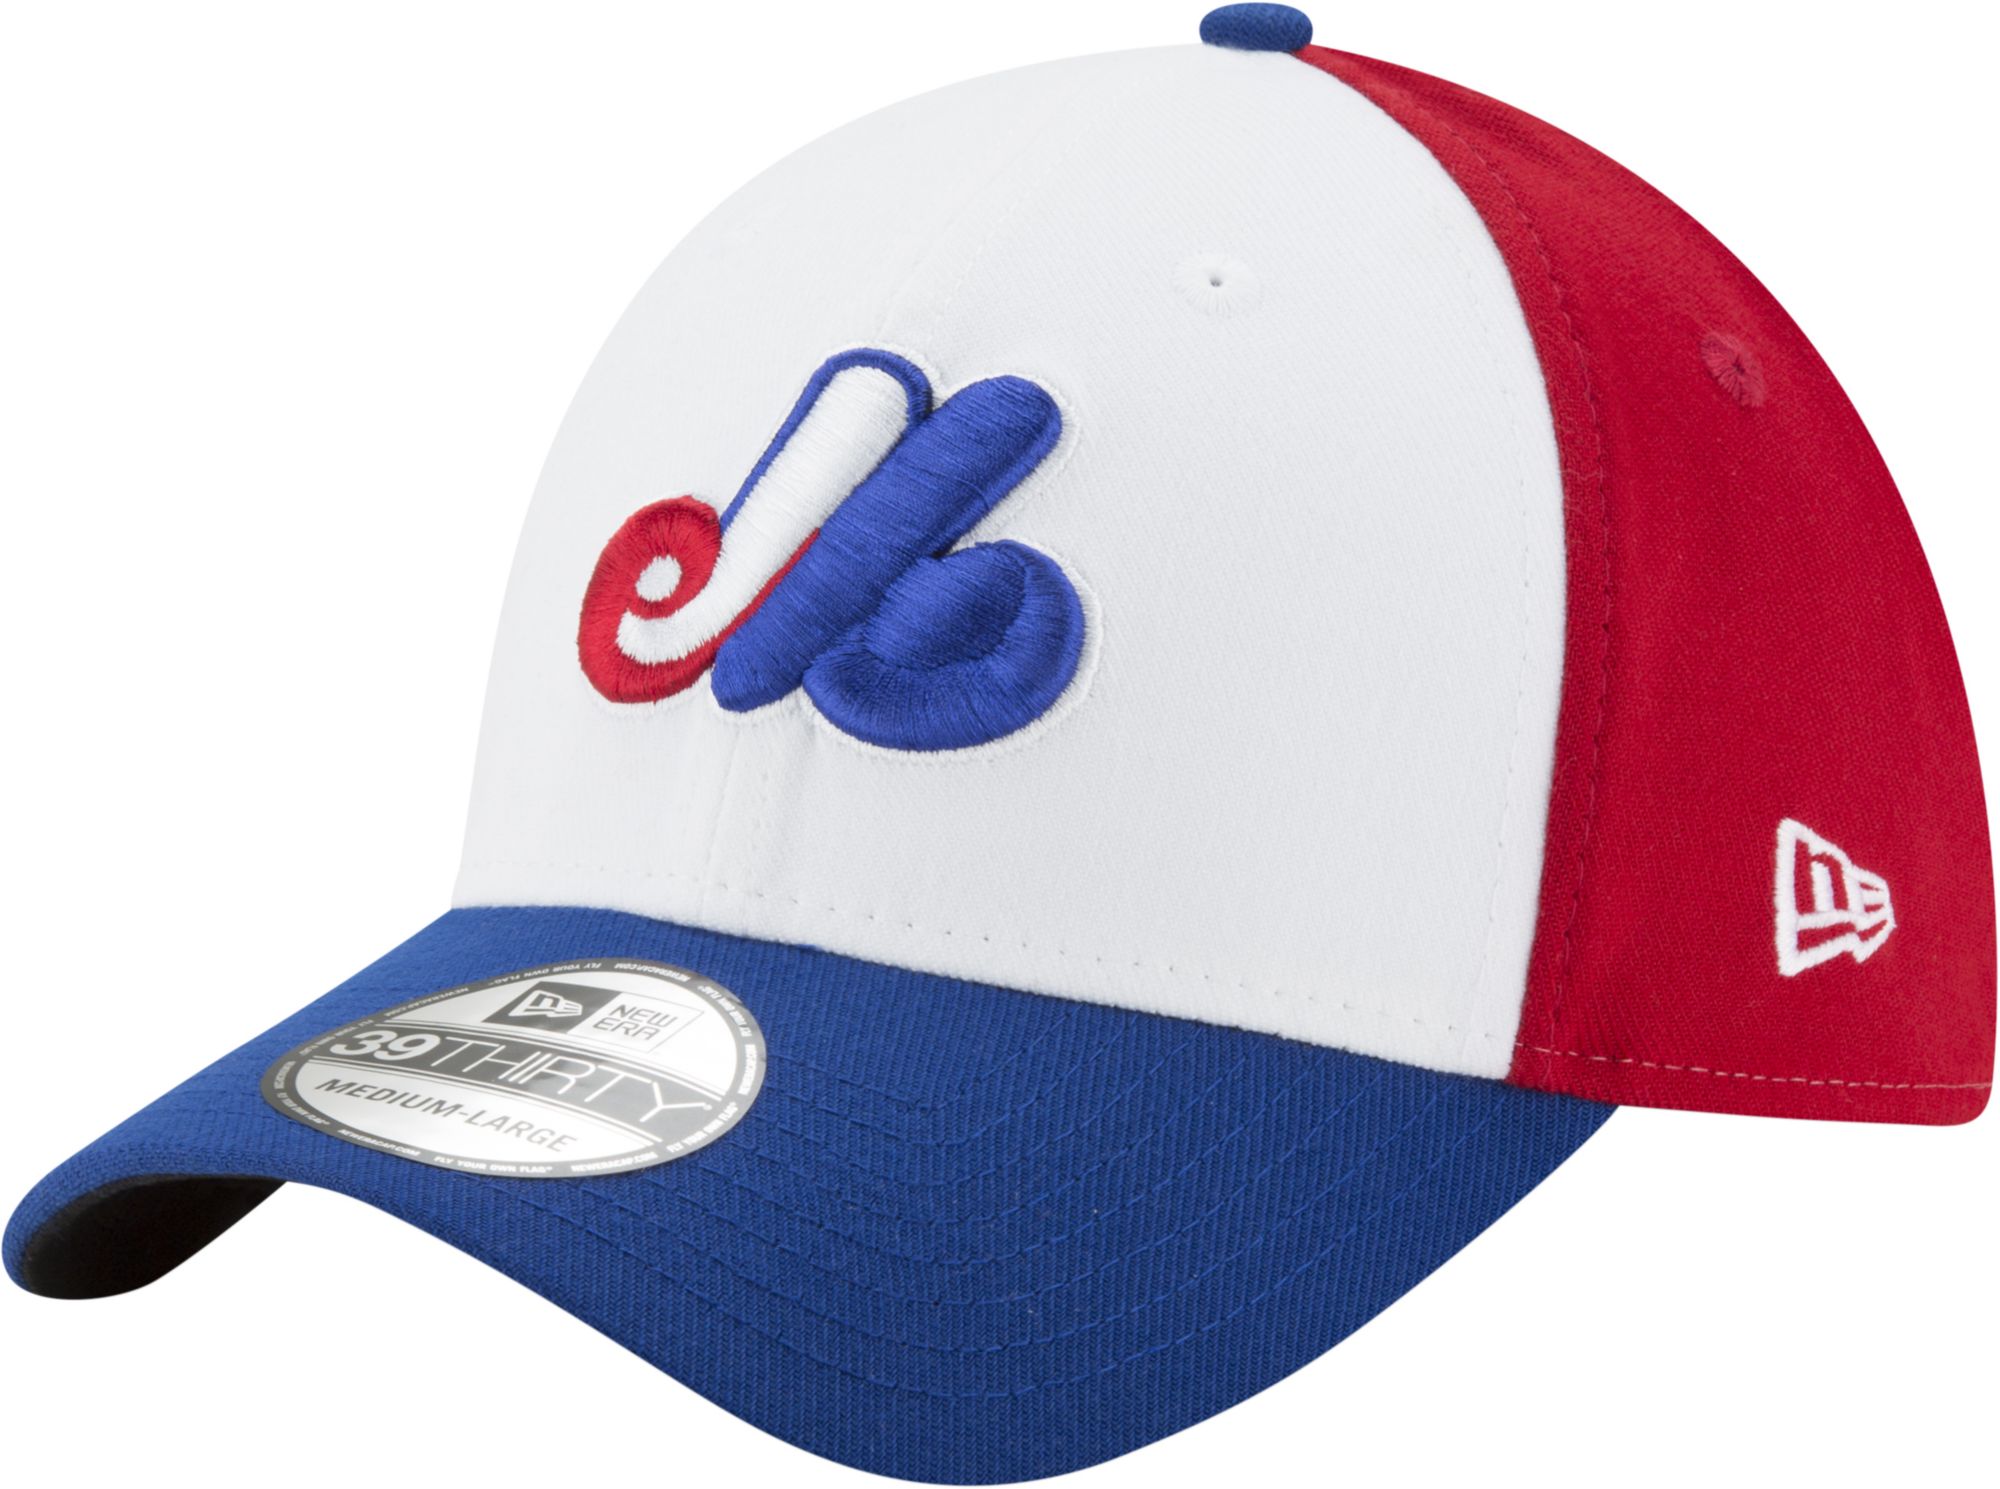 washington nationals red white and blue hat